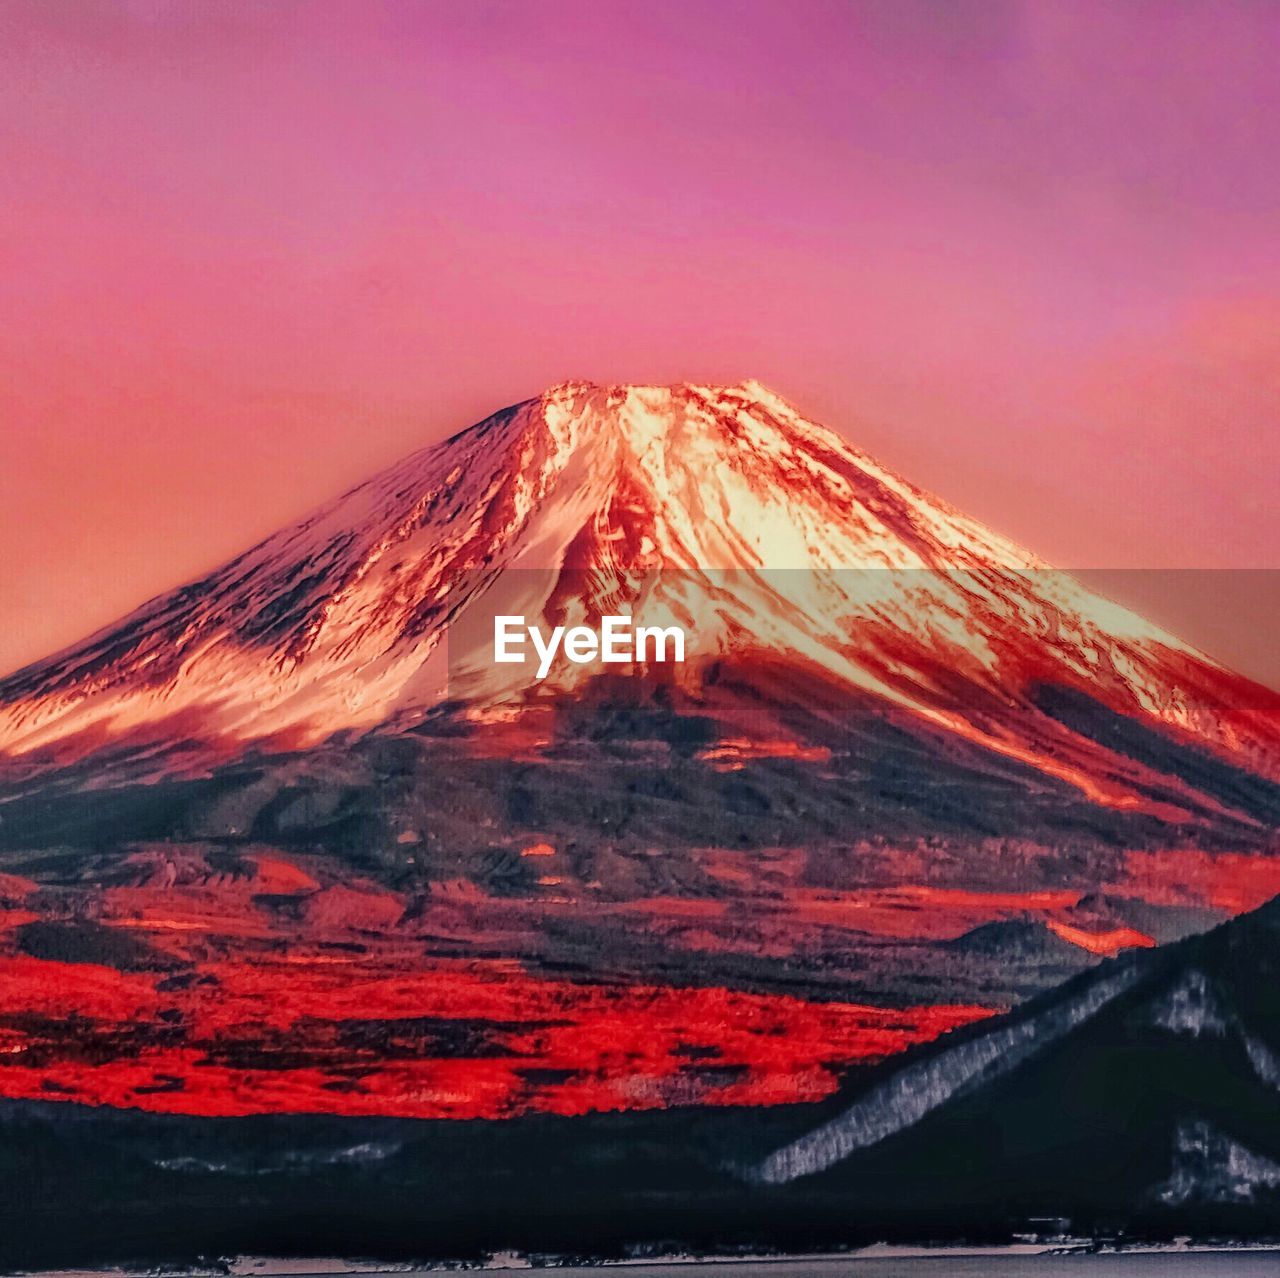 SCENIC VIEW OF VOLCANIC MOUNTAIN AGAINST CLEAR SKY